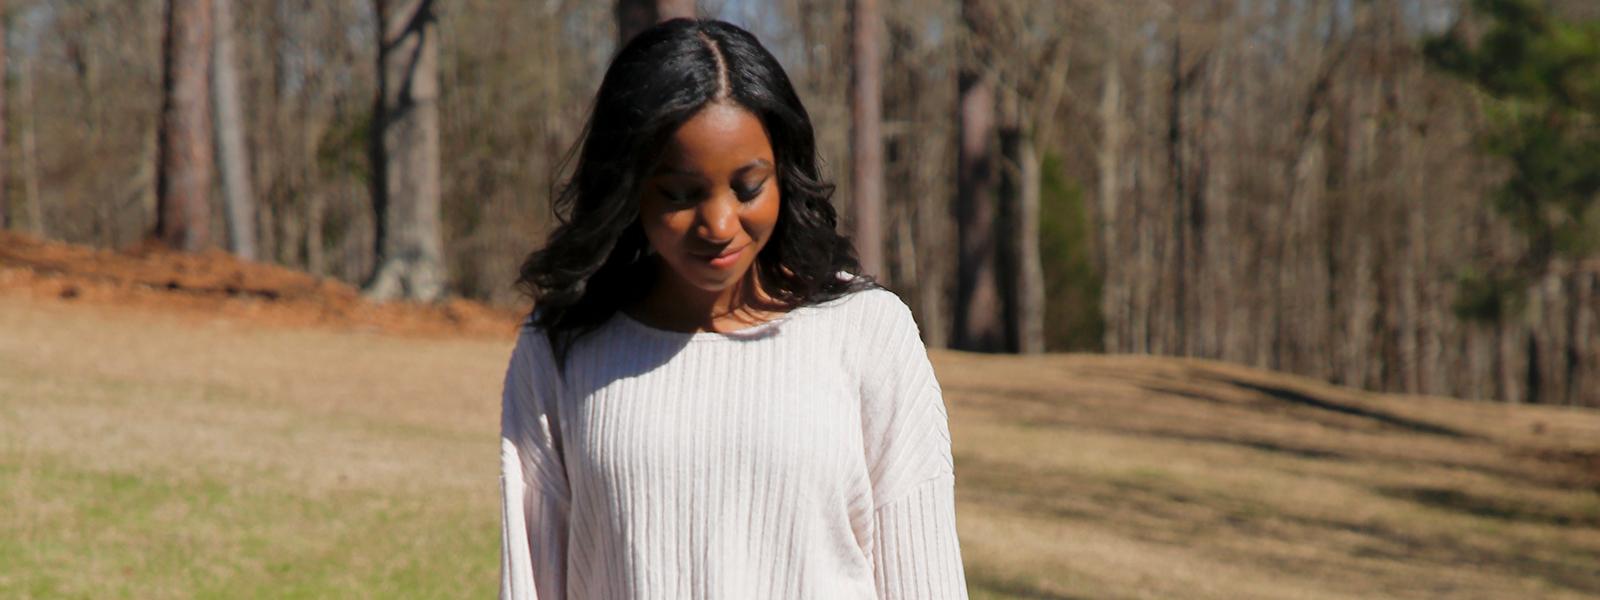 Chariti Mealing: "Bible and theology classes have challenged me to go deeper in my walk with Christ " (photo provided) 